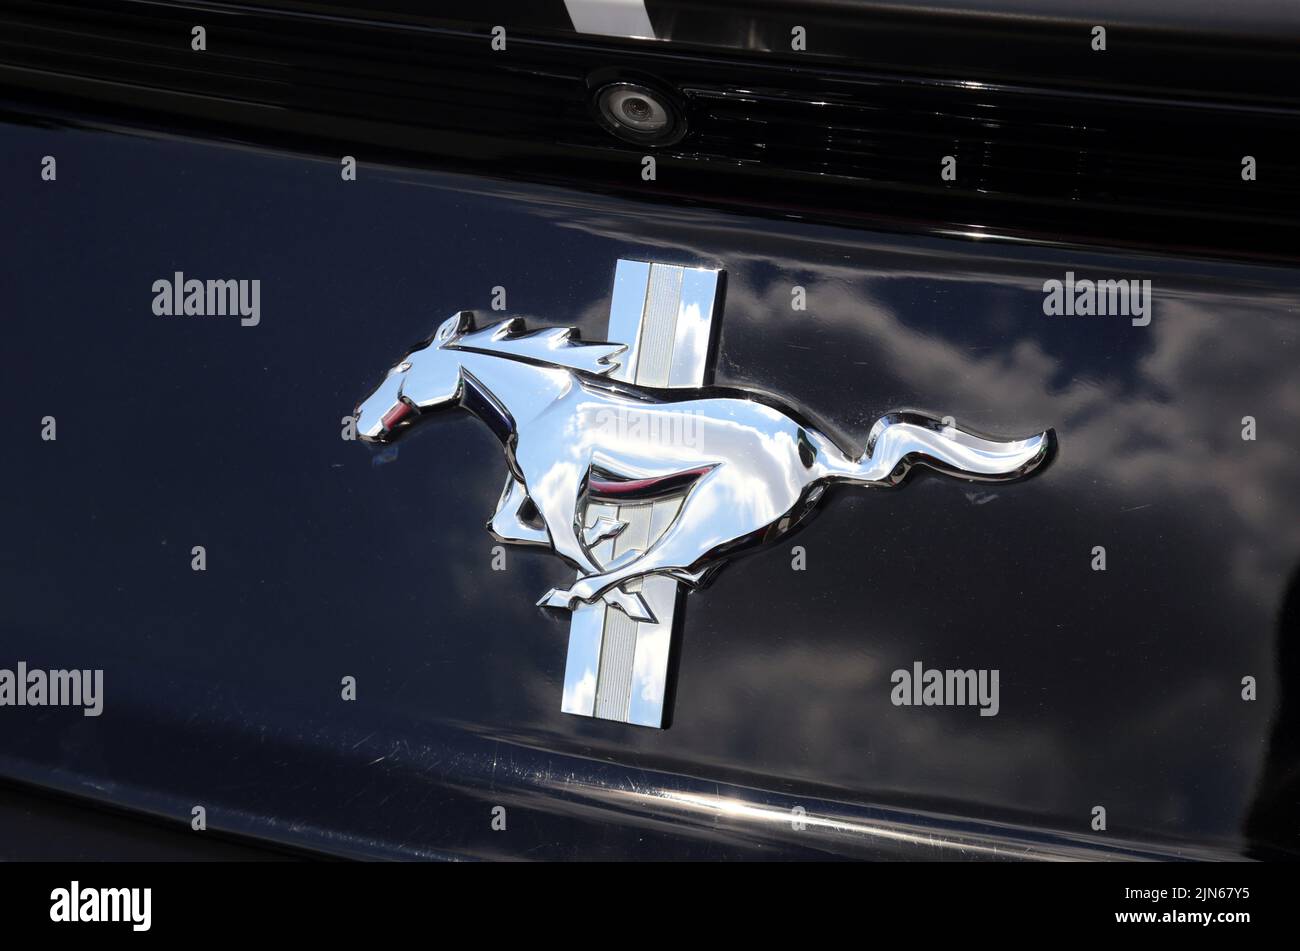 Cracow. Krakow. Poland. Ford Mustang galloping horse logo on the rear of the car. Stock Photo